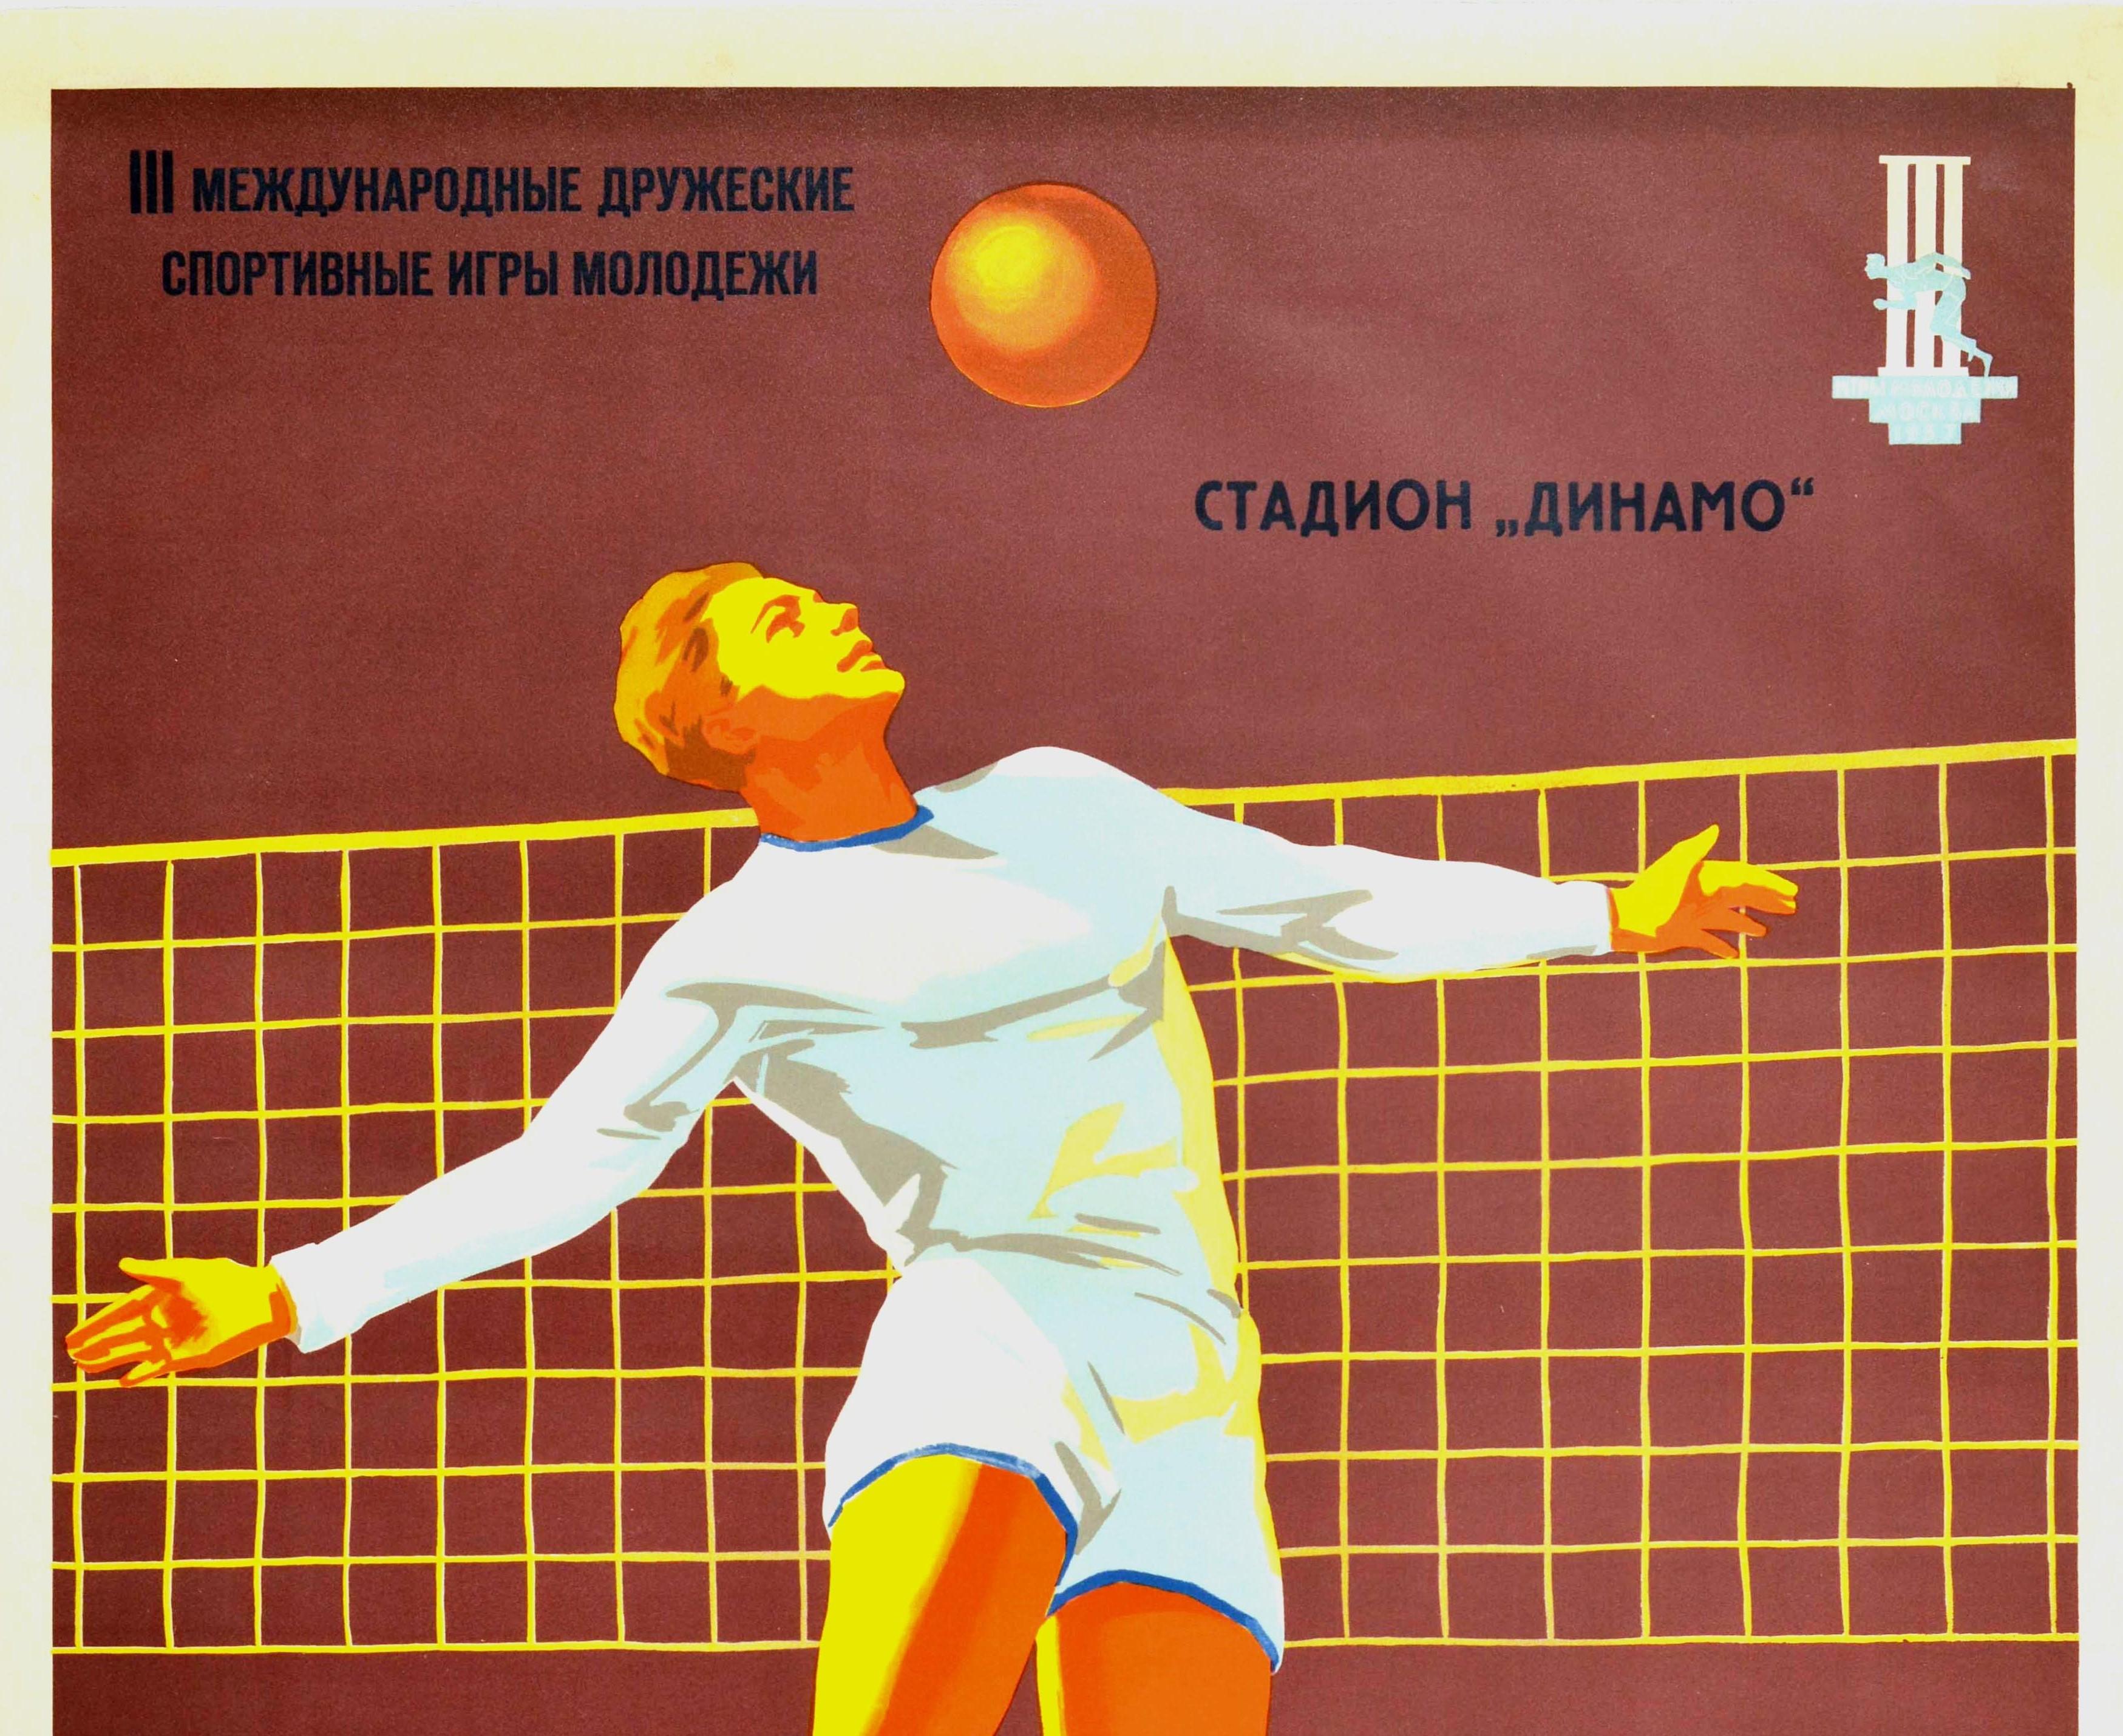 Original vintage sport poster for a volleyball competition at the III International Friendship Moscow Youth Games held from 30 July-9 August 1957 at the Dynamo Stadium featuring a volleyball player in white jumping up to hit the ball at the net in